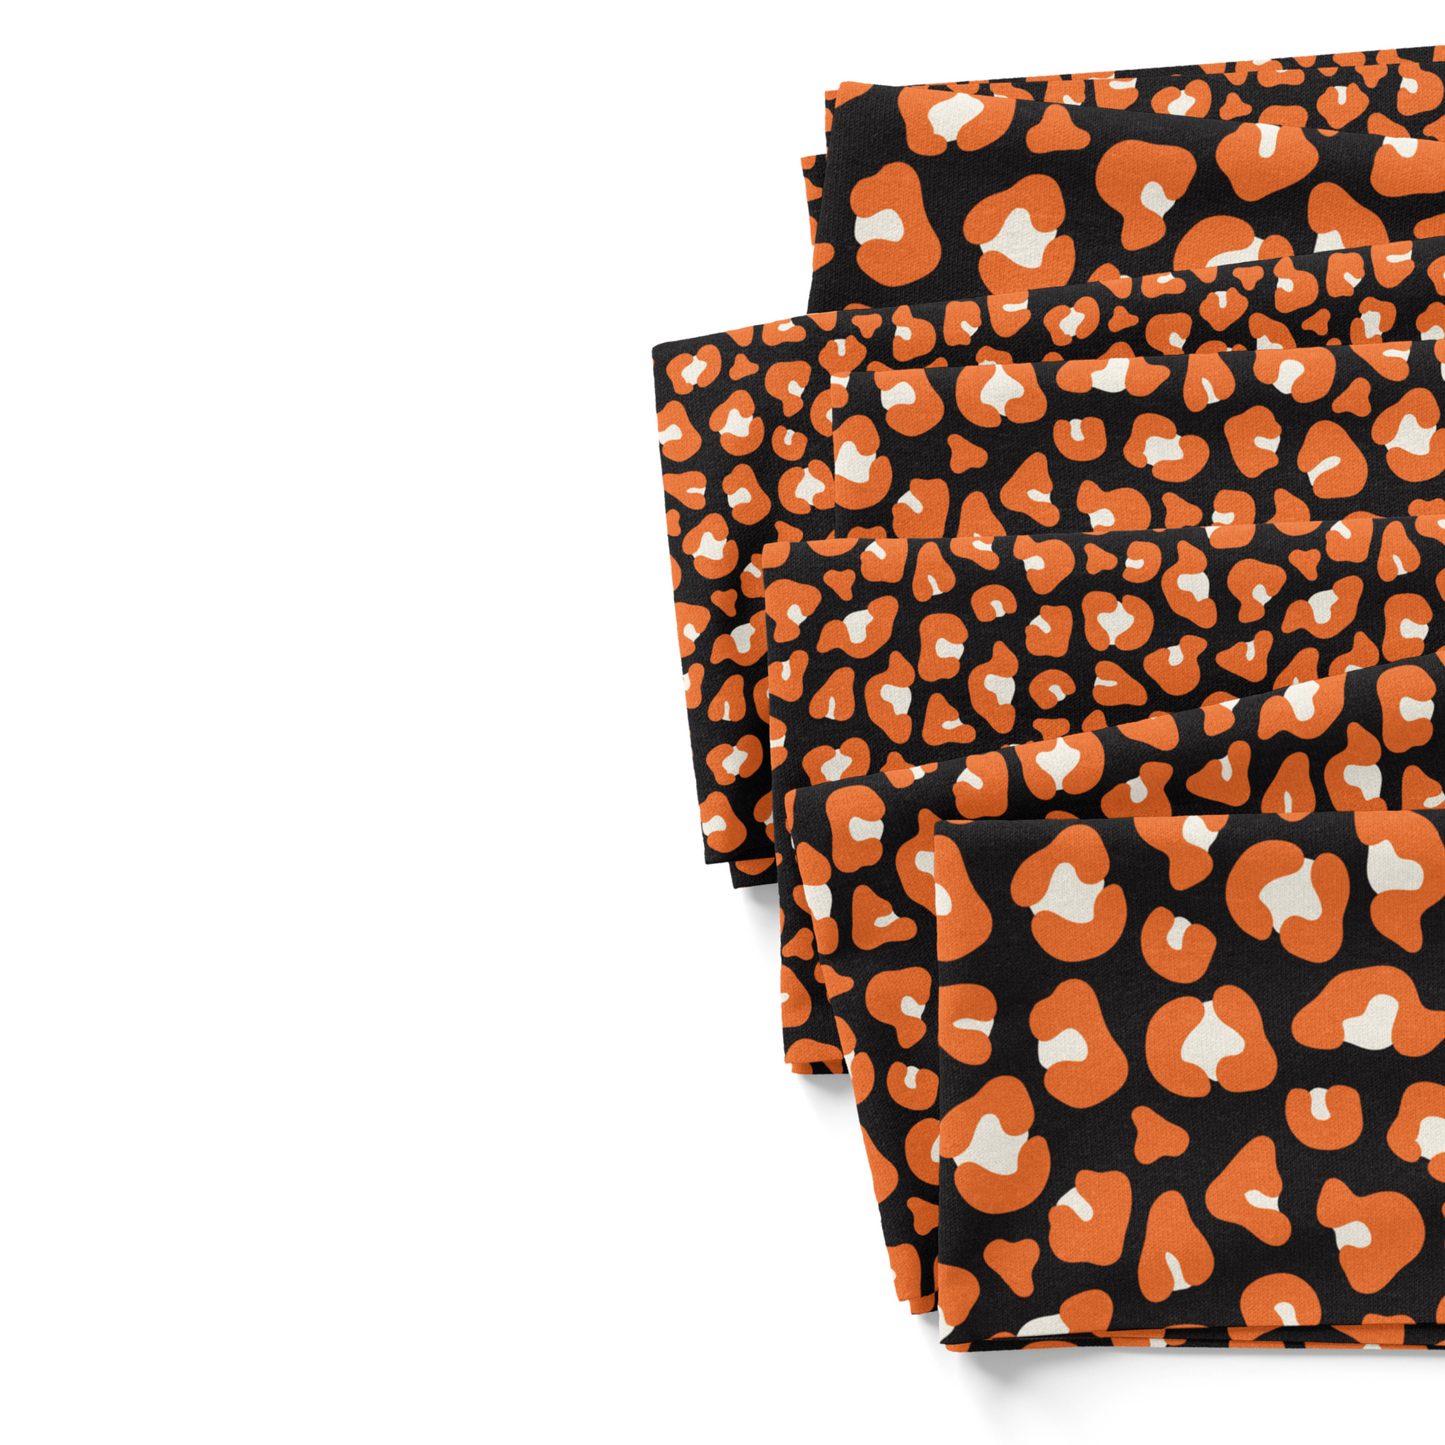 Orange and white leopard print fabric swatches.